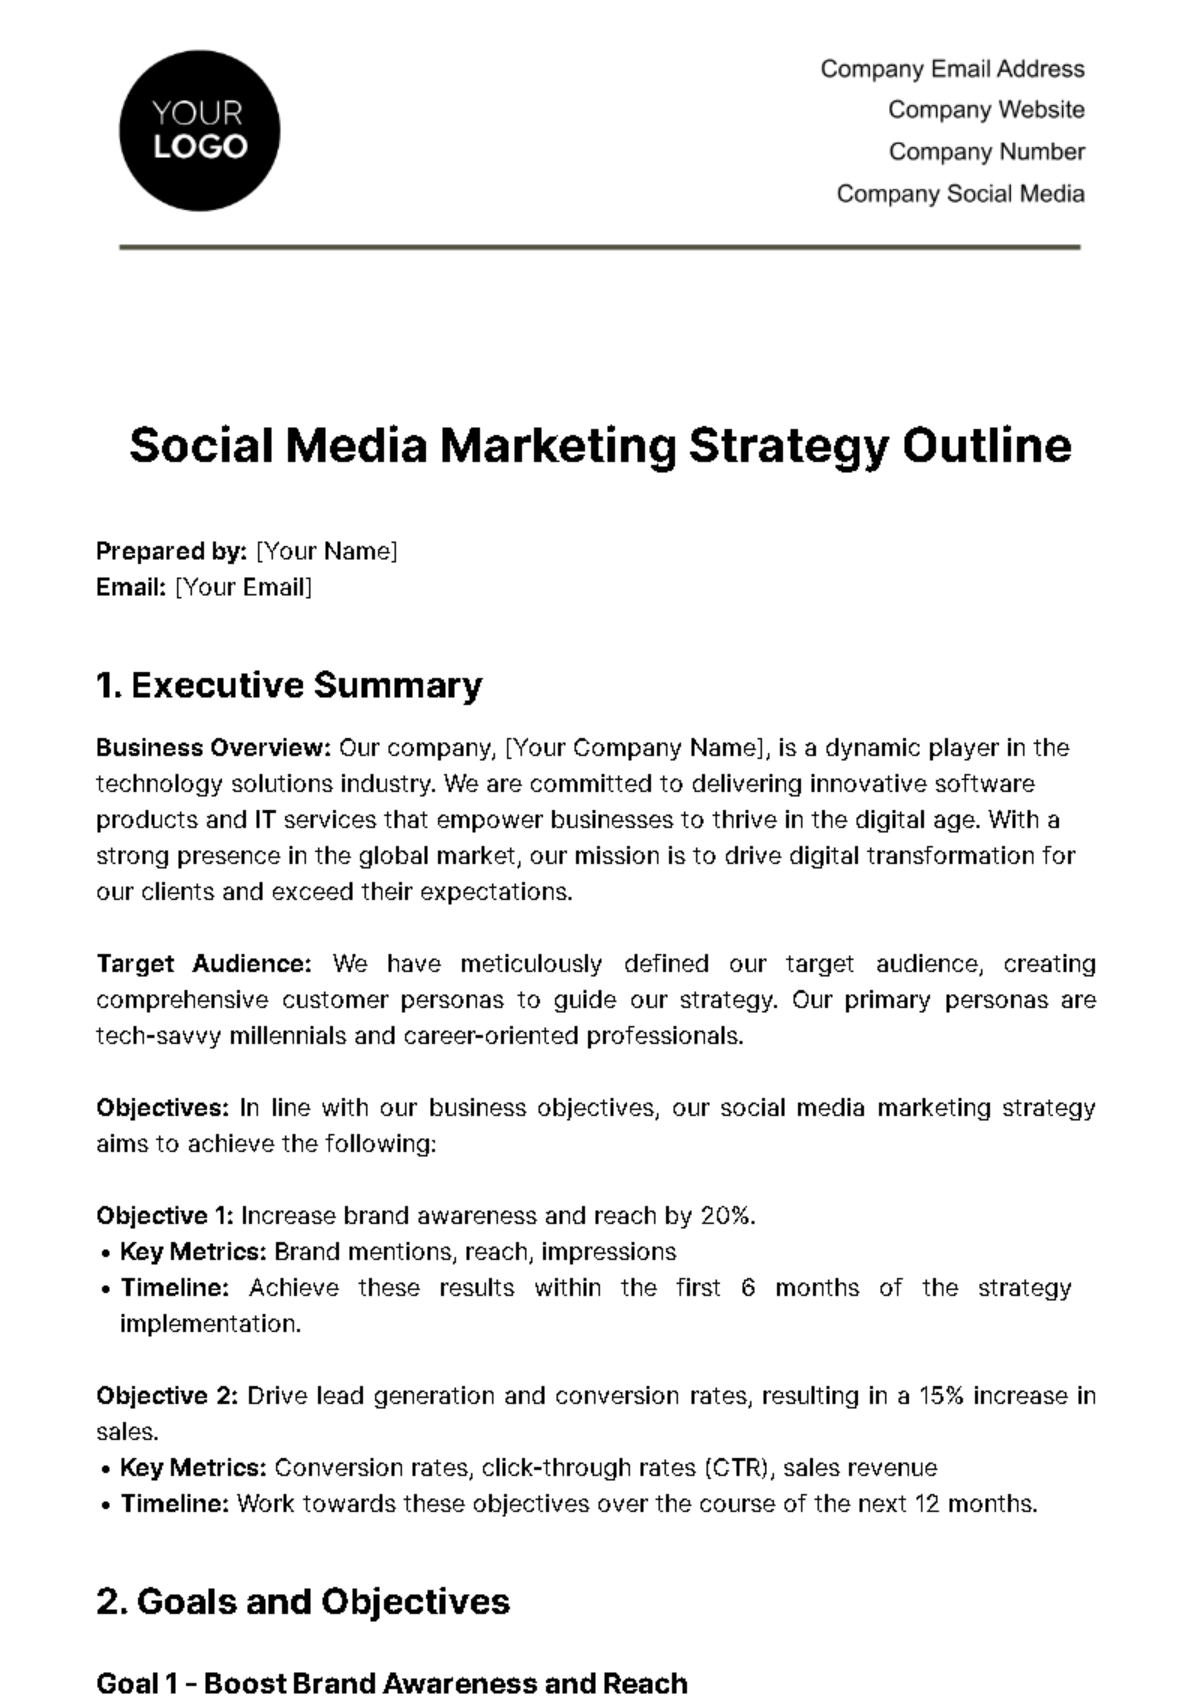 Social Media Marketing Strategy Outline Template